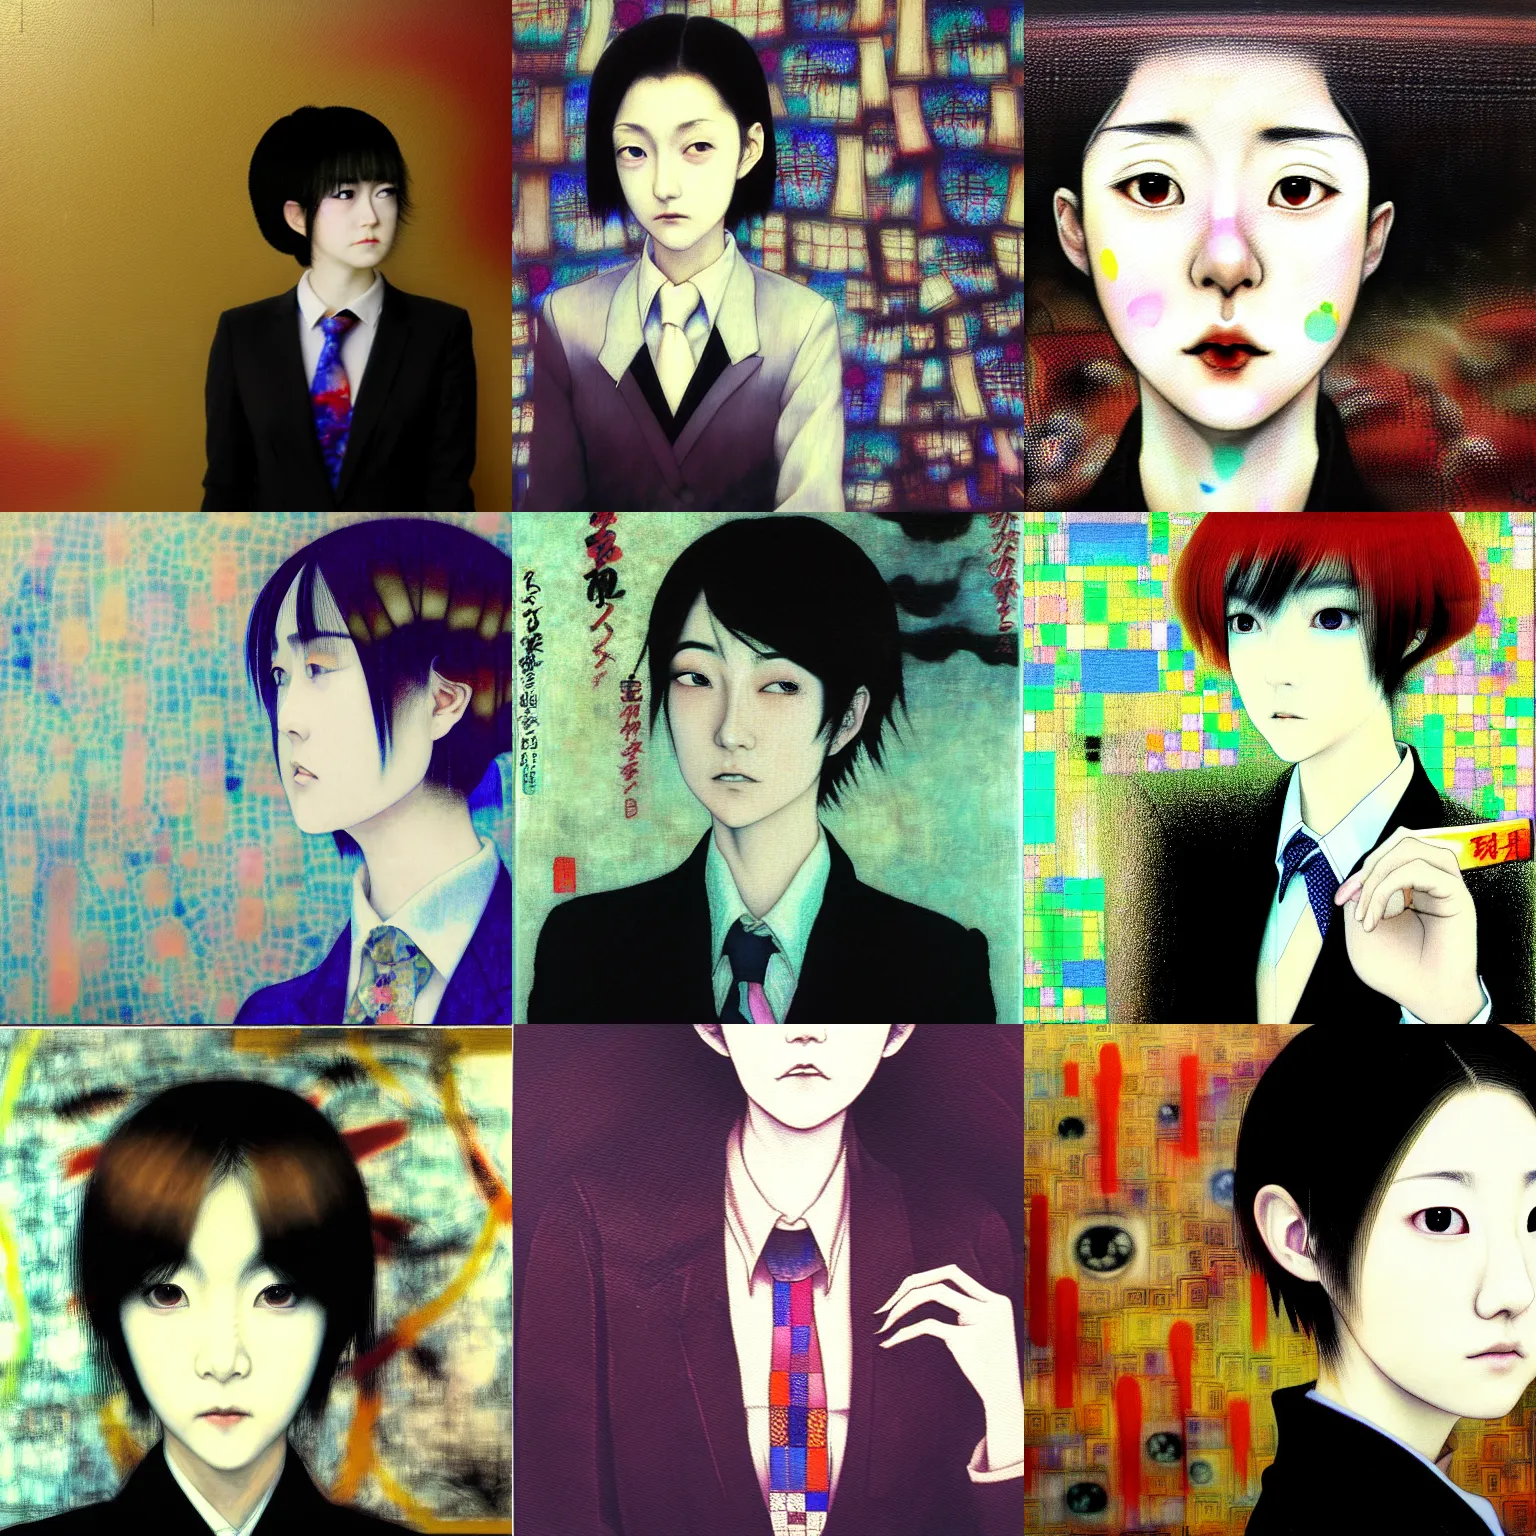 Prompt: yoshitaka amano blurred and dreamy realistic three quarter view portrait of a young woman with short hair and black eyes wearing office suit with tie, junji ito abstract patterns in the background, satoshi kon anime, noisy film grain effect, highly detailed, renaissance oil painting, weird portrait angle, blurred lost edges